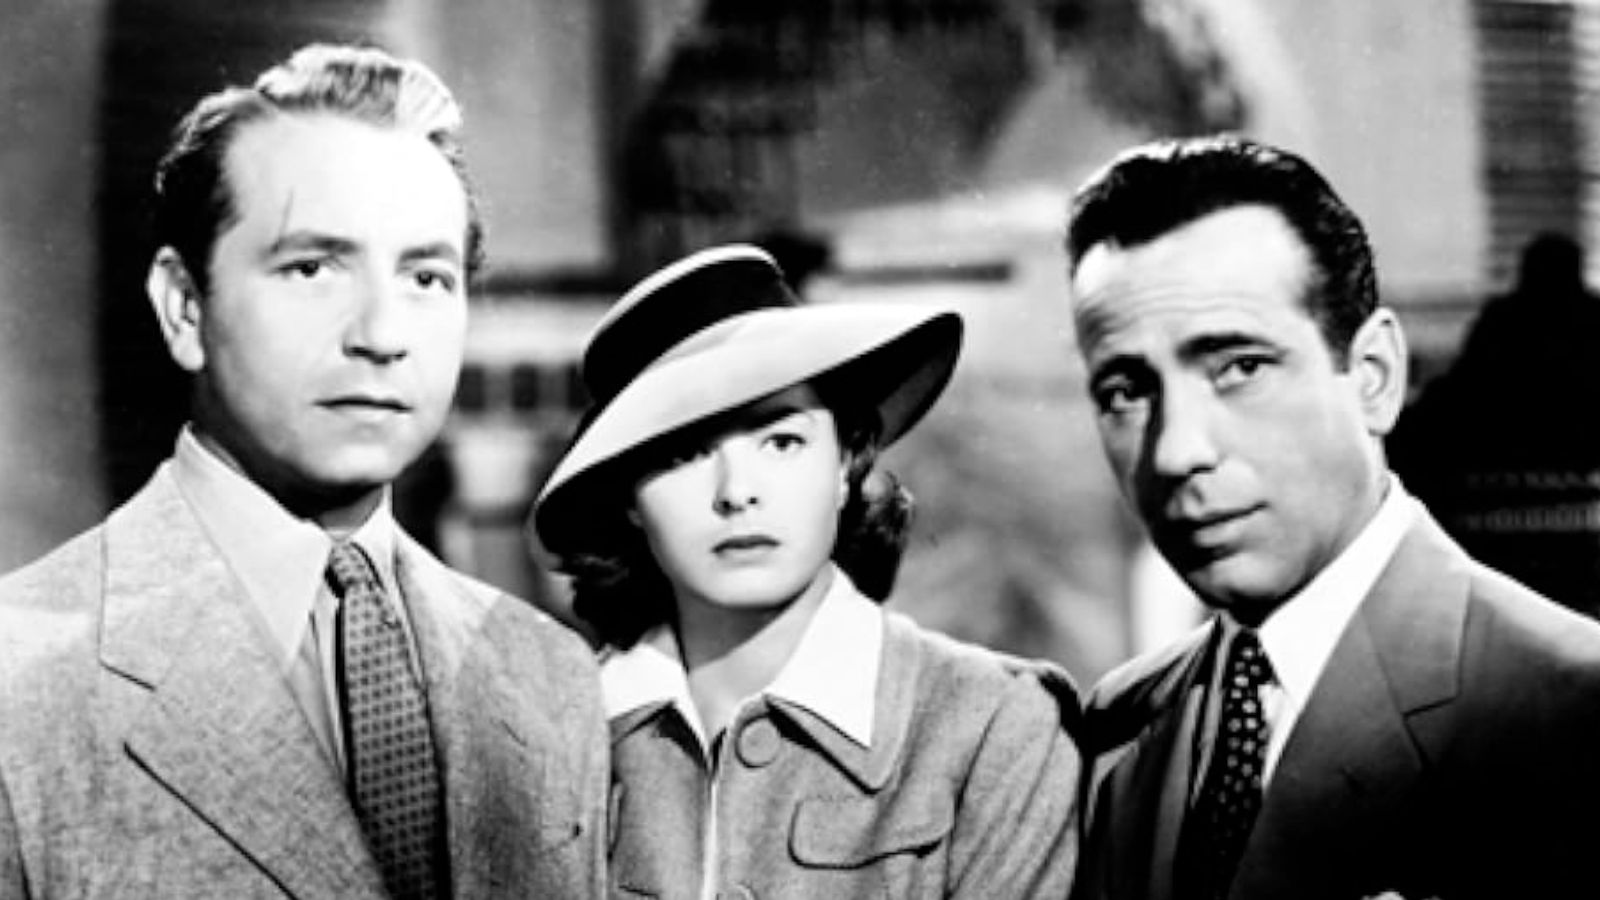 An iconic piece of Hollywood cinema starring Humphrey Bogart, Casablanca tells the story of American ex-pats trying to escape the Nazis in French Morocco.